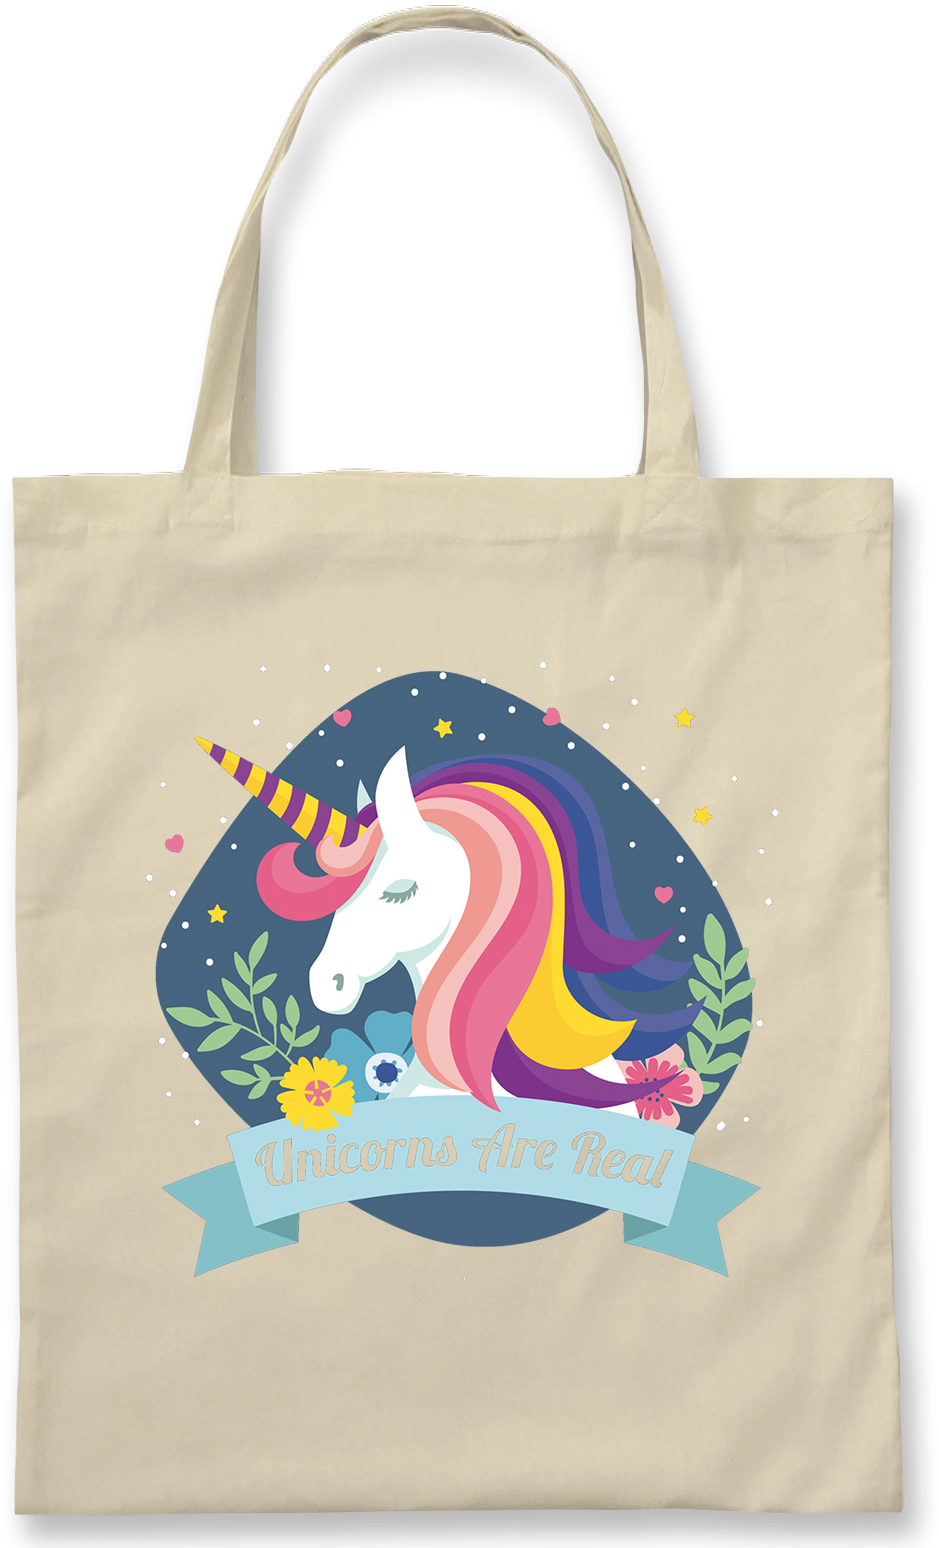 A White Tote Bag With A Unicorn On It